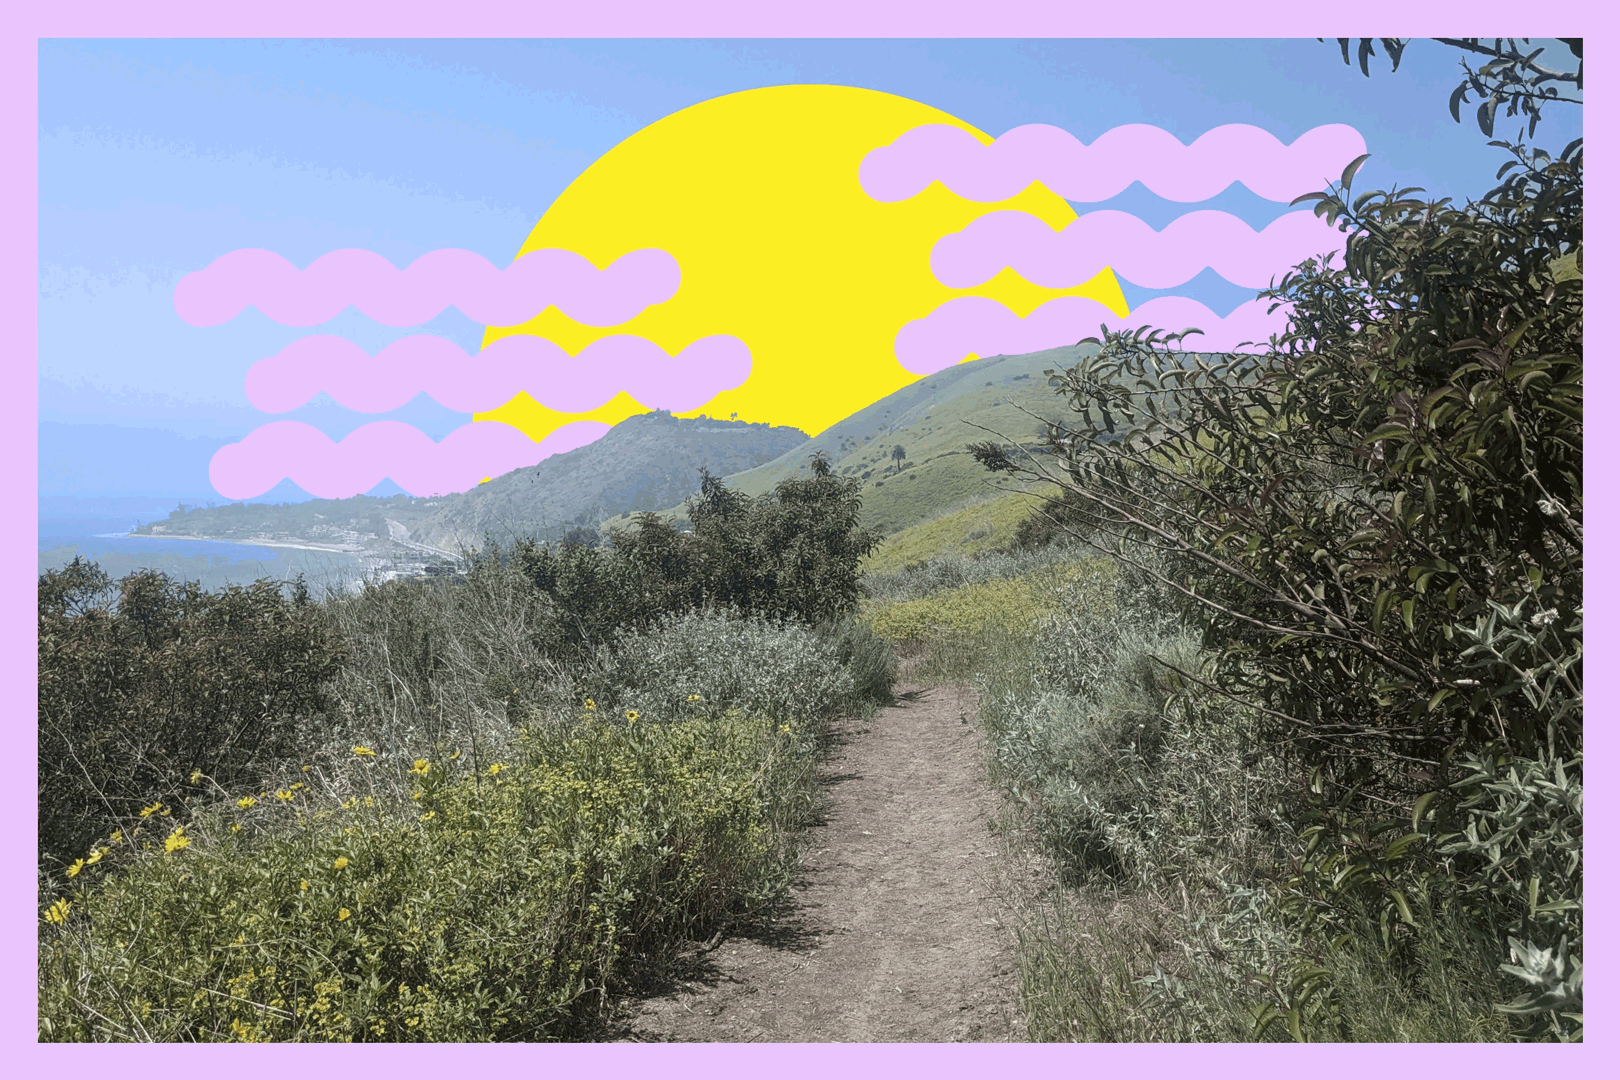 A dirt path looks out to hills and ocean in the distance. An illustrated yellow sun and two animated waves are set behind the hills.